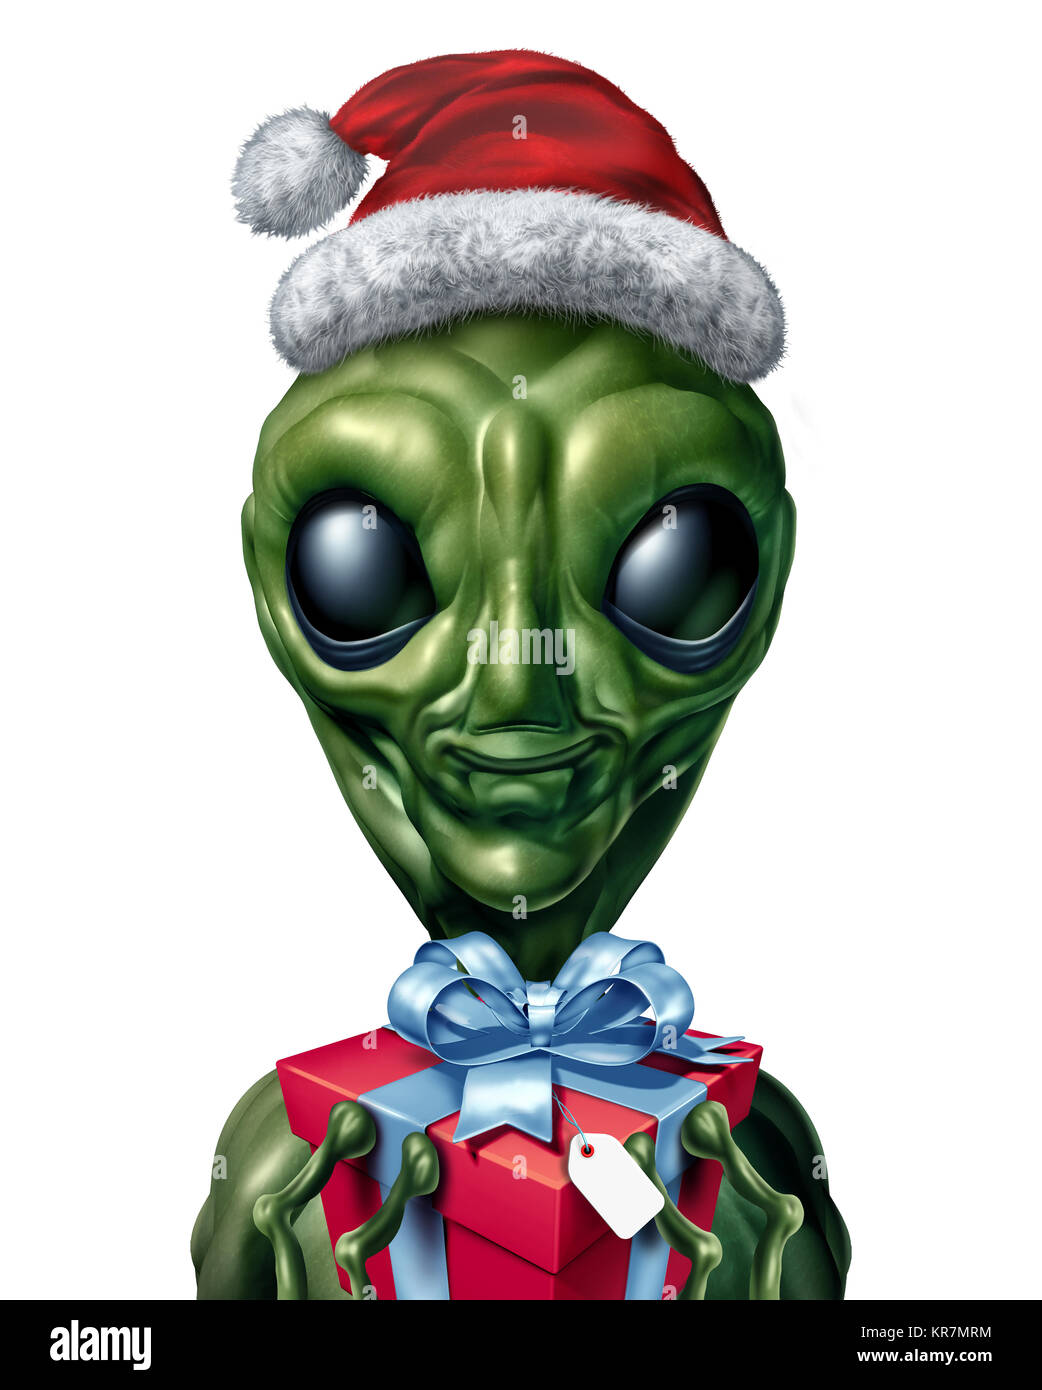 UFO alien Christmas holiday character as the extraterrestrial gift giver as a space creature during winter season or new year as a 3D illustration. Stock Photo